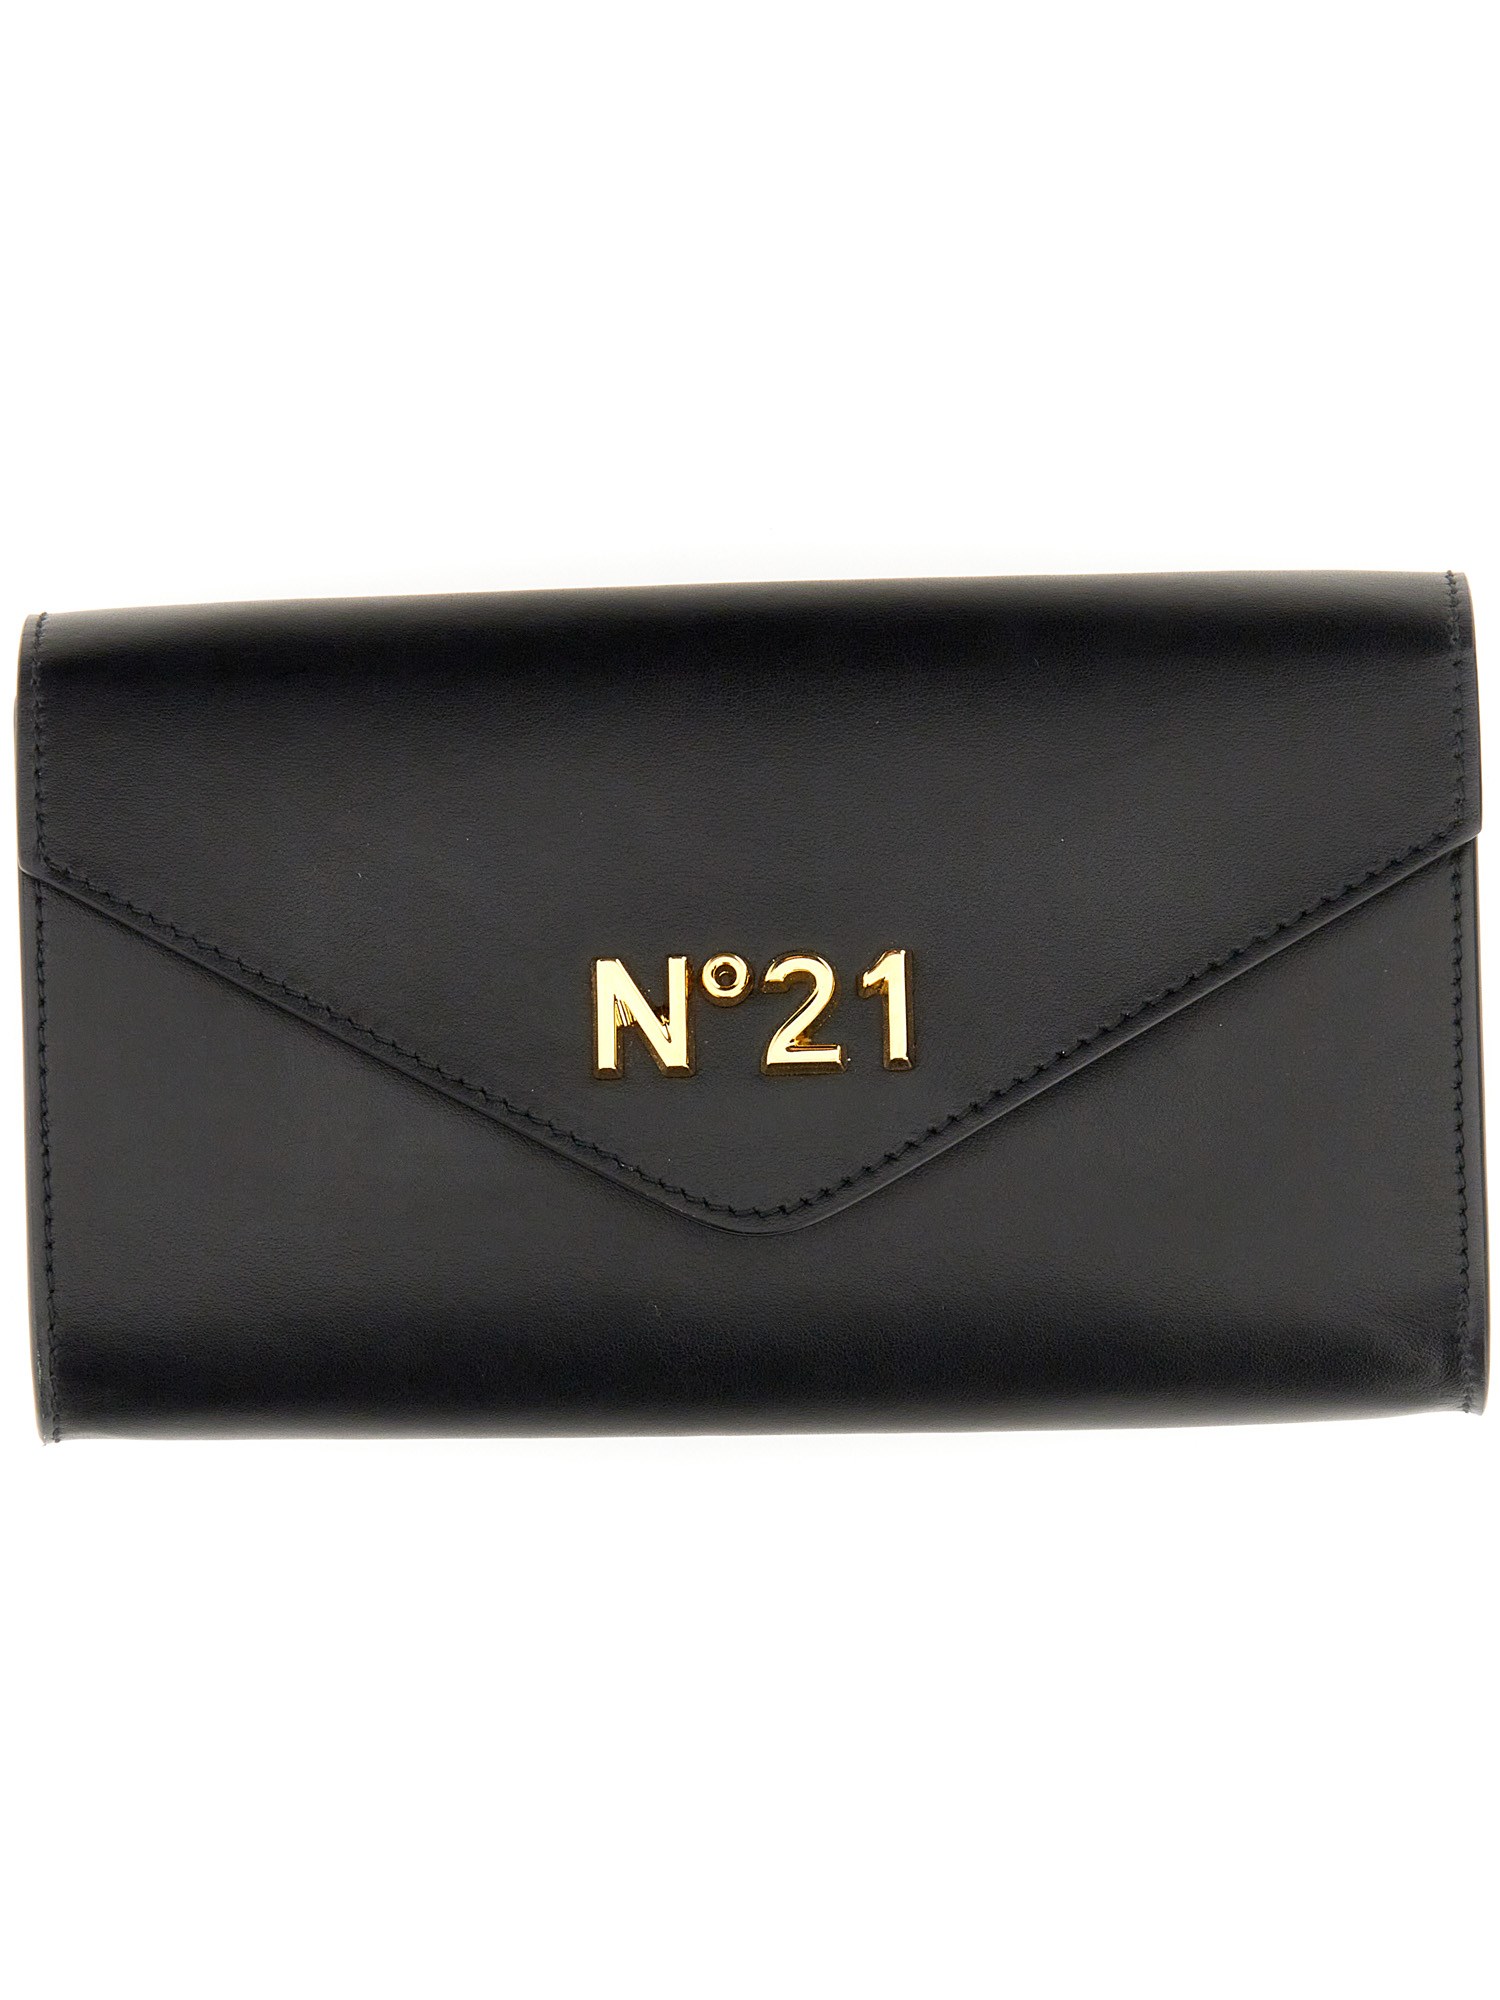 nÂ°21 wallet with chain and logo